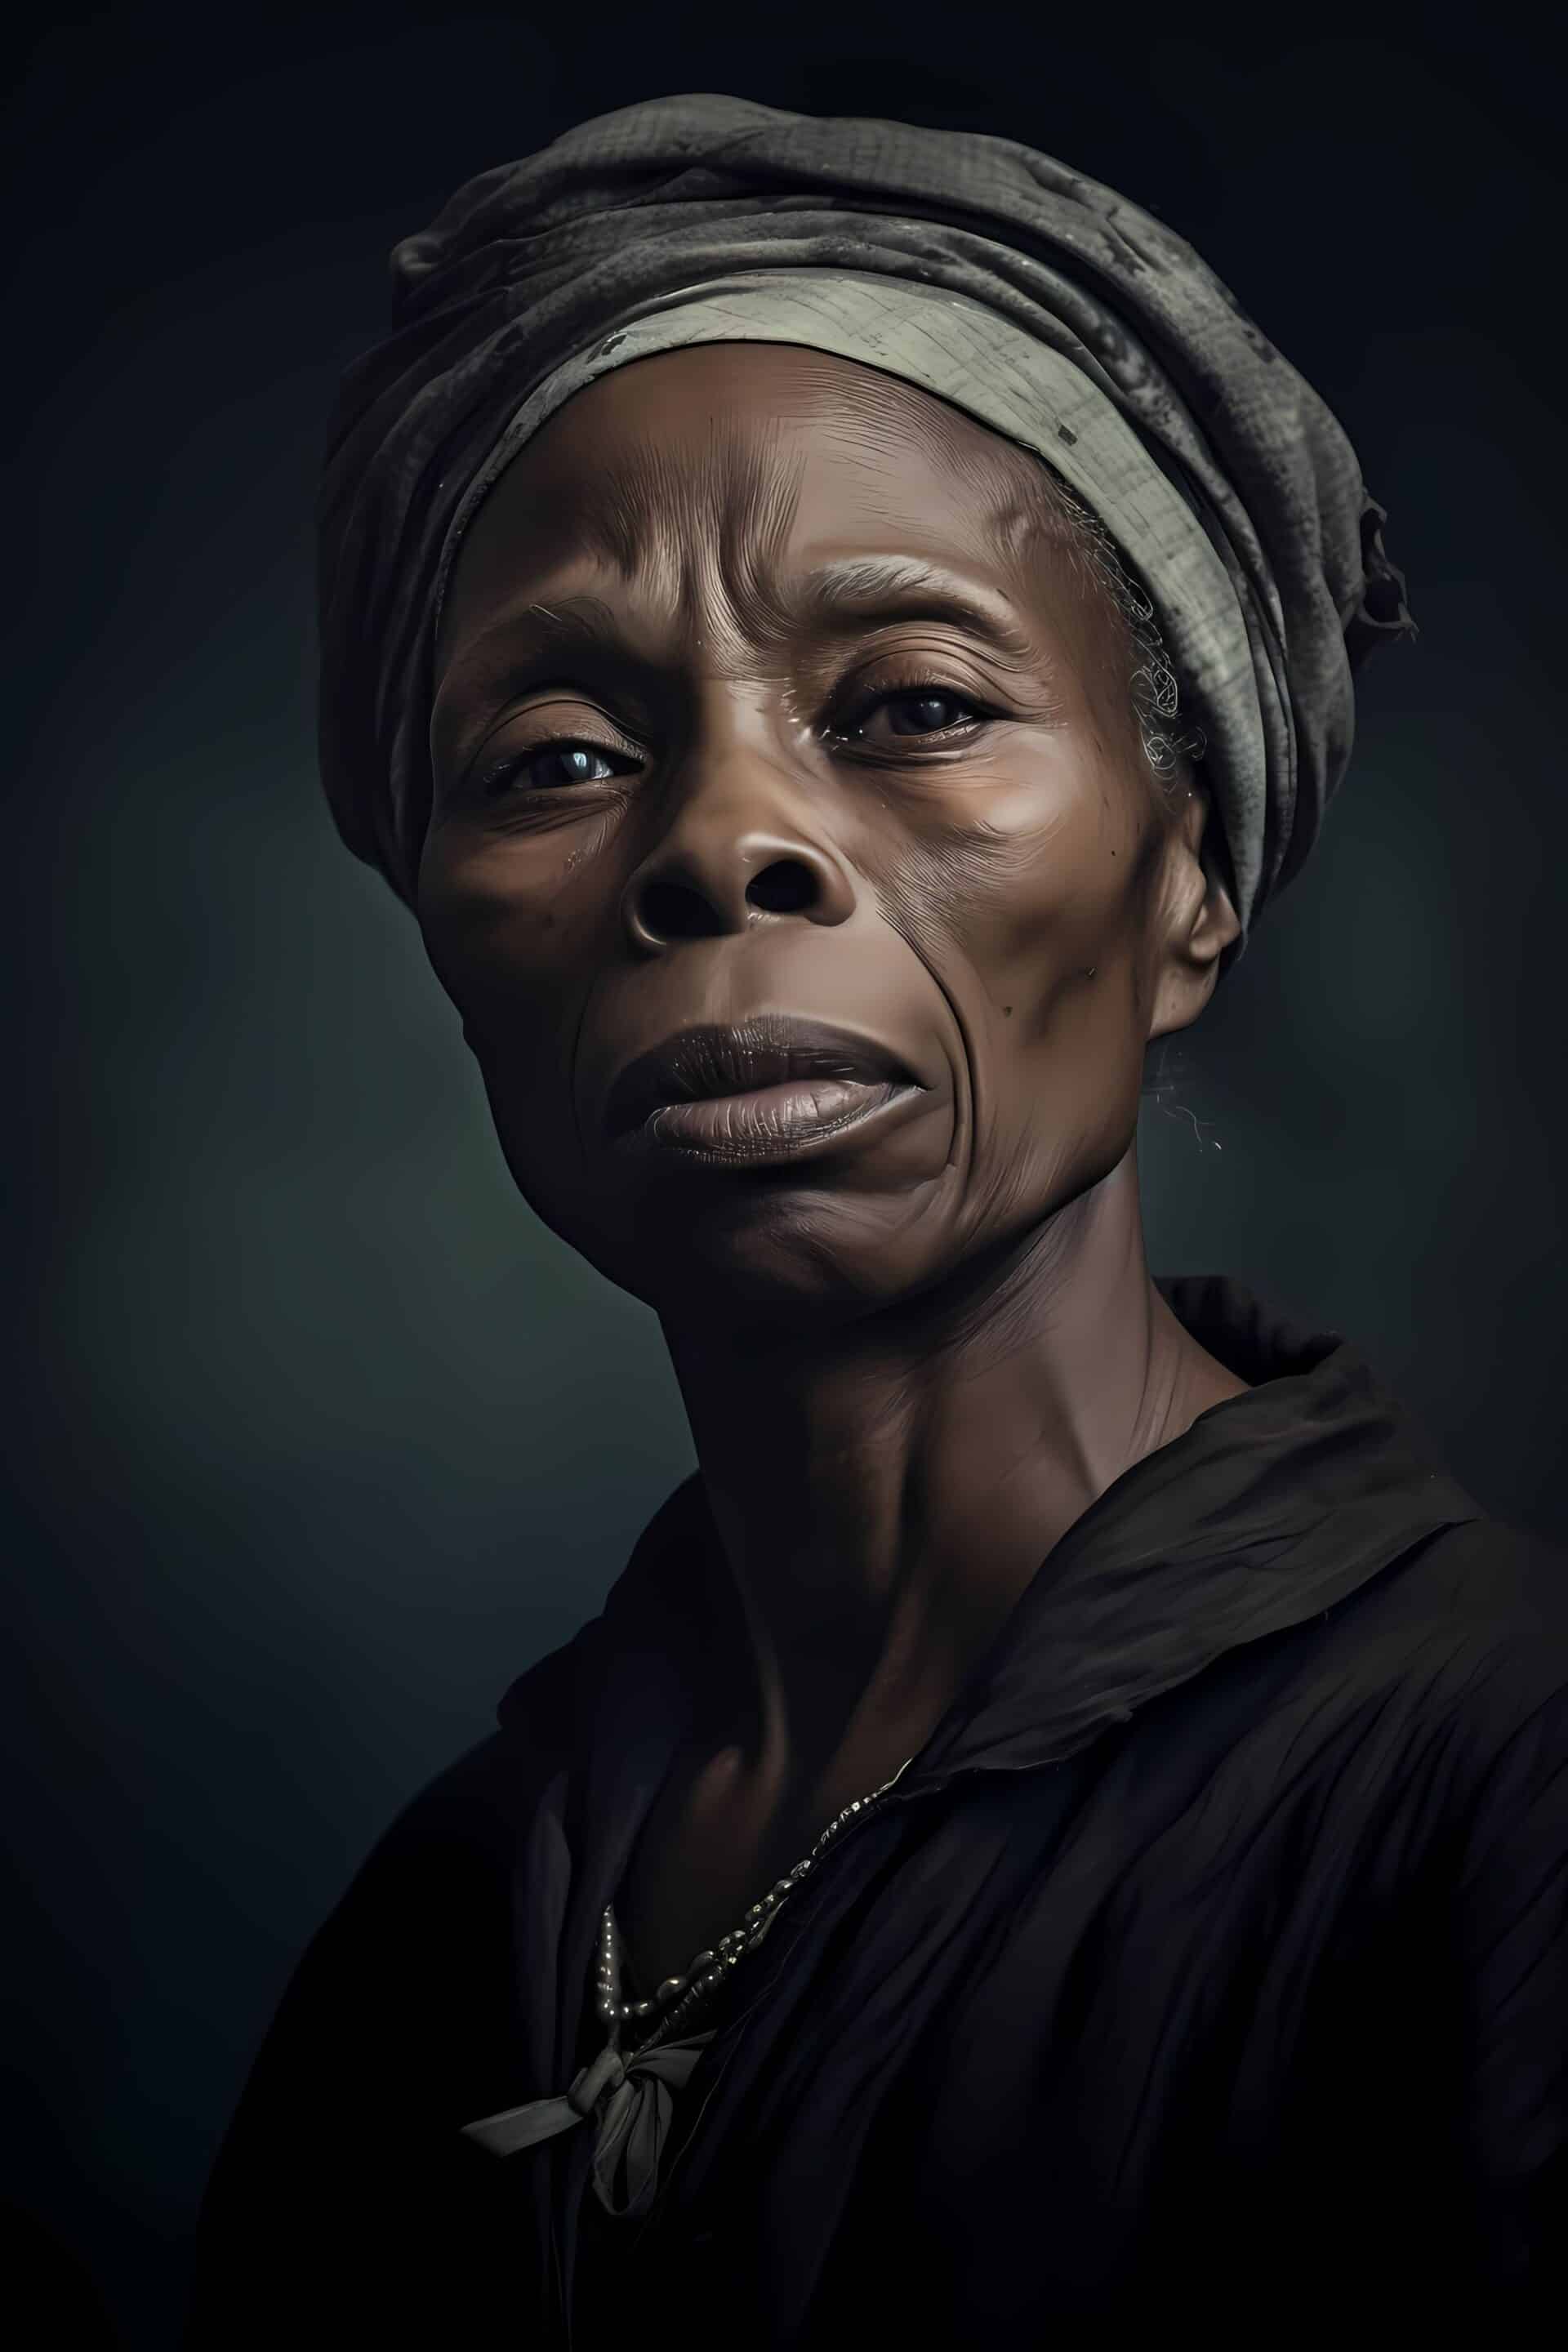 Harriet Tubman - Every Great Dream Begins with a Dreamer